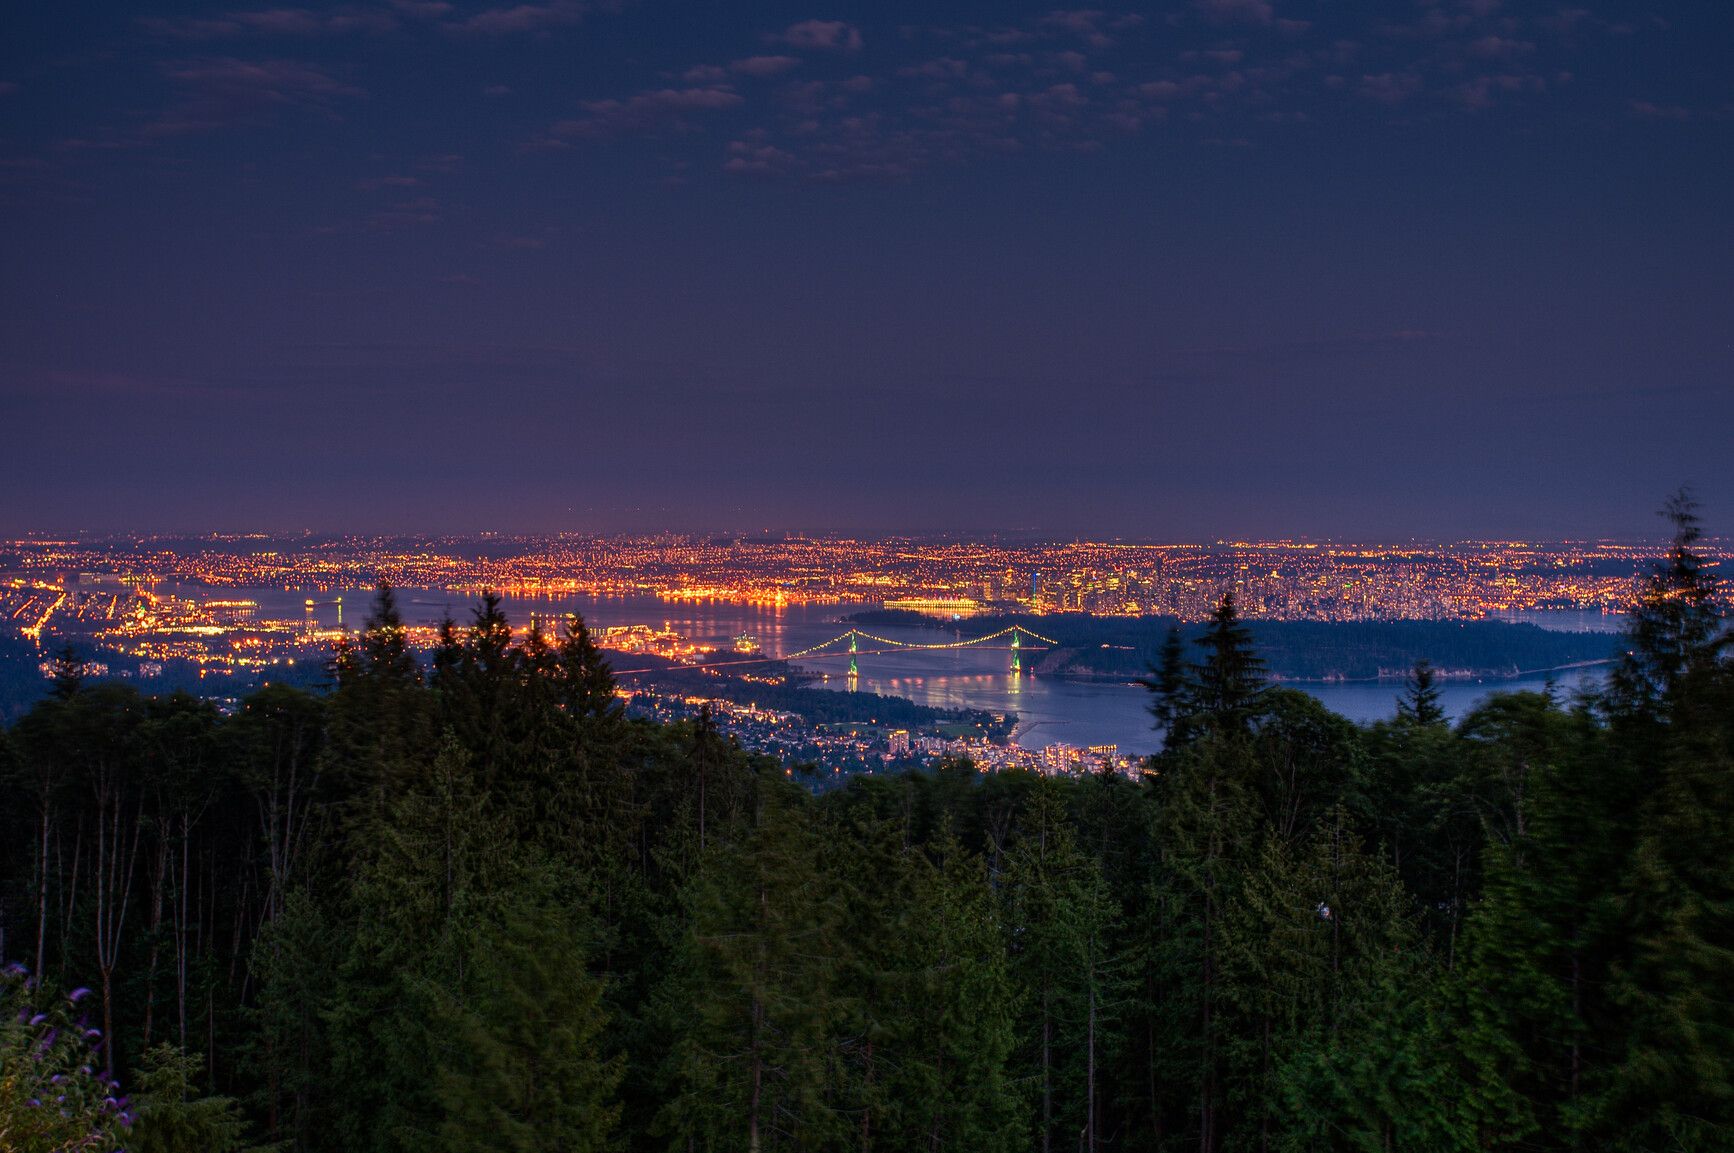 A nighttime view of the lower mainland from Cypress Park.